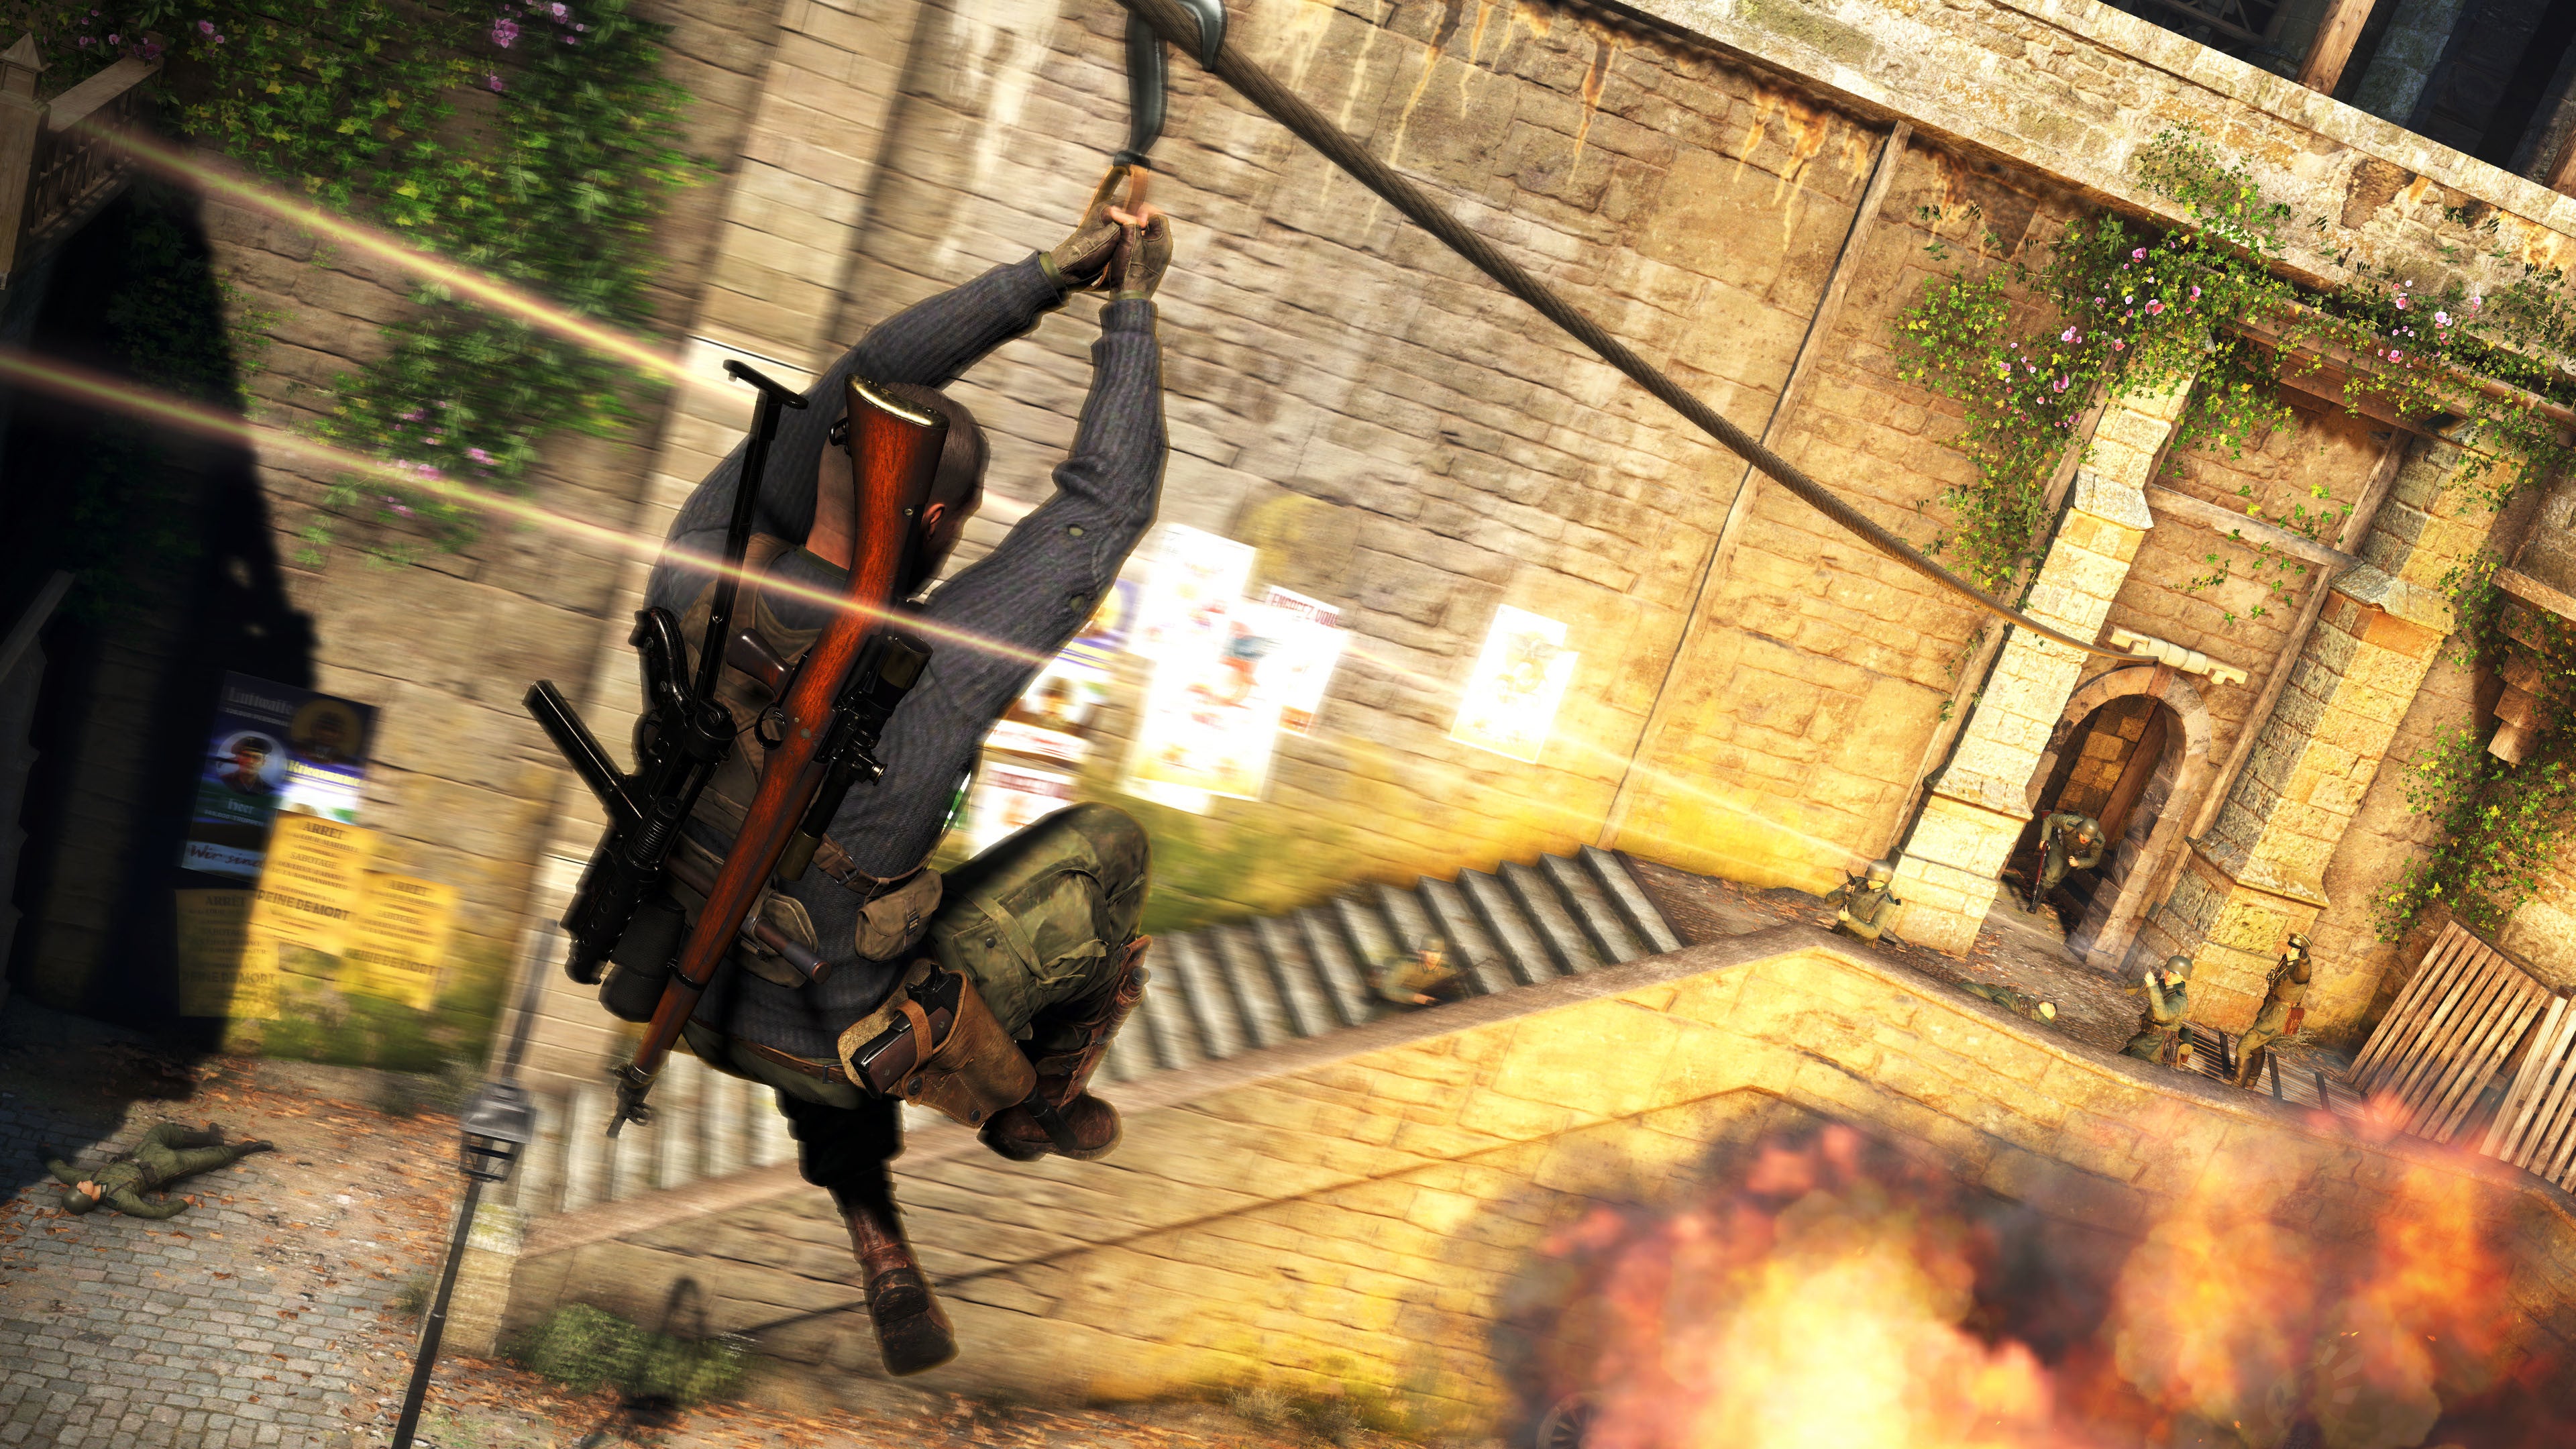 A screenshot of Sniper Elite 5 showing the player ziplining over an explosion and directly towards five or more firing Nazis.